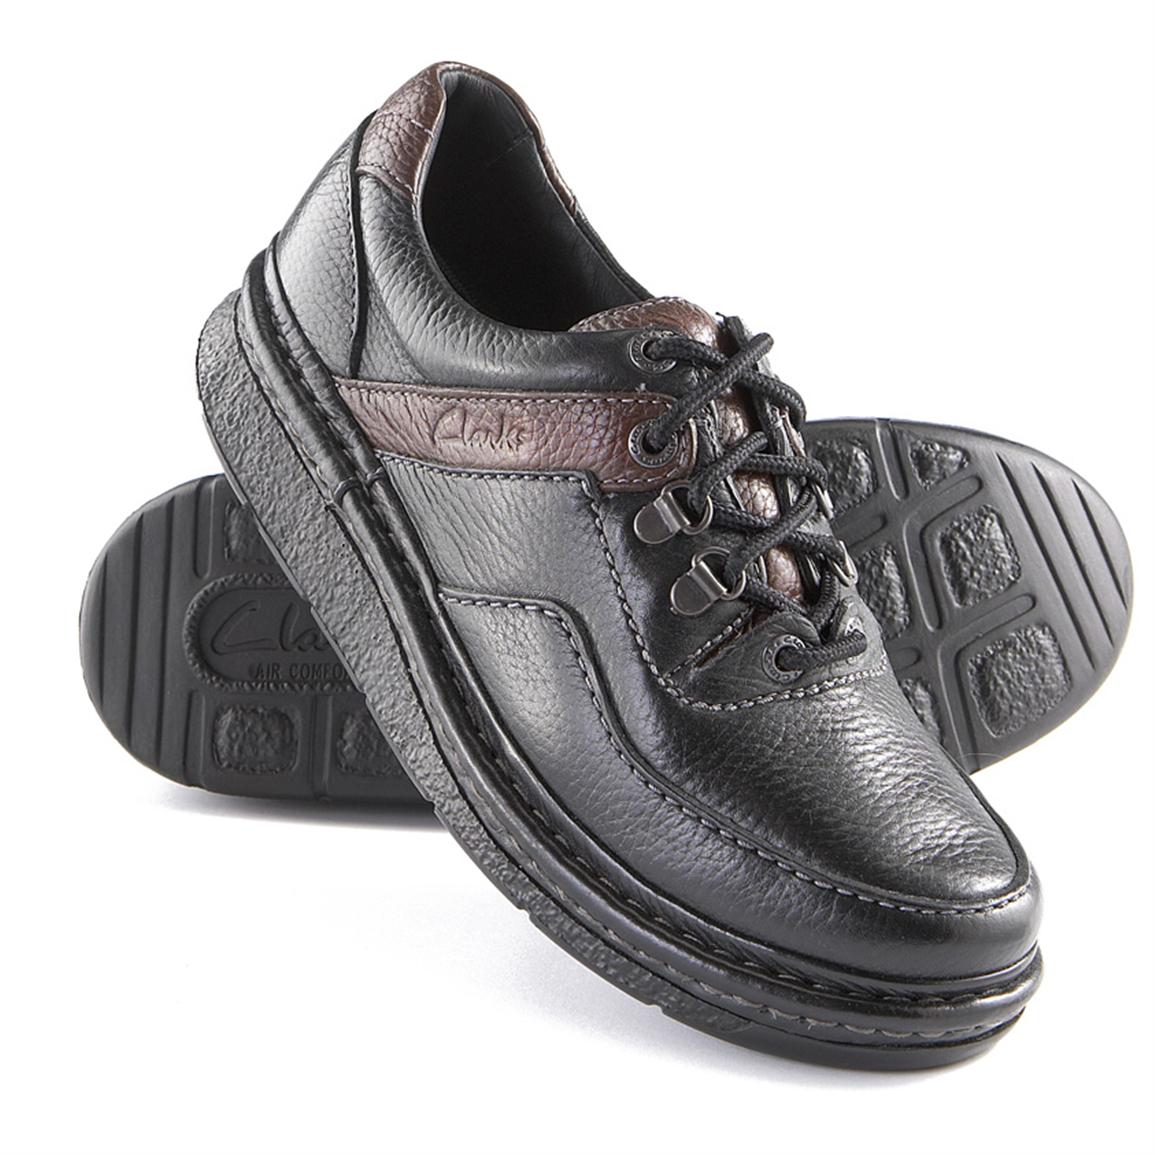 clarks air mover shoes